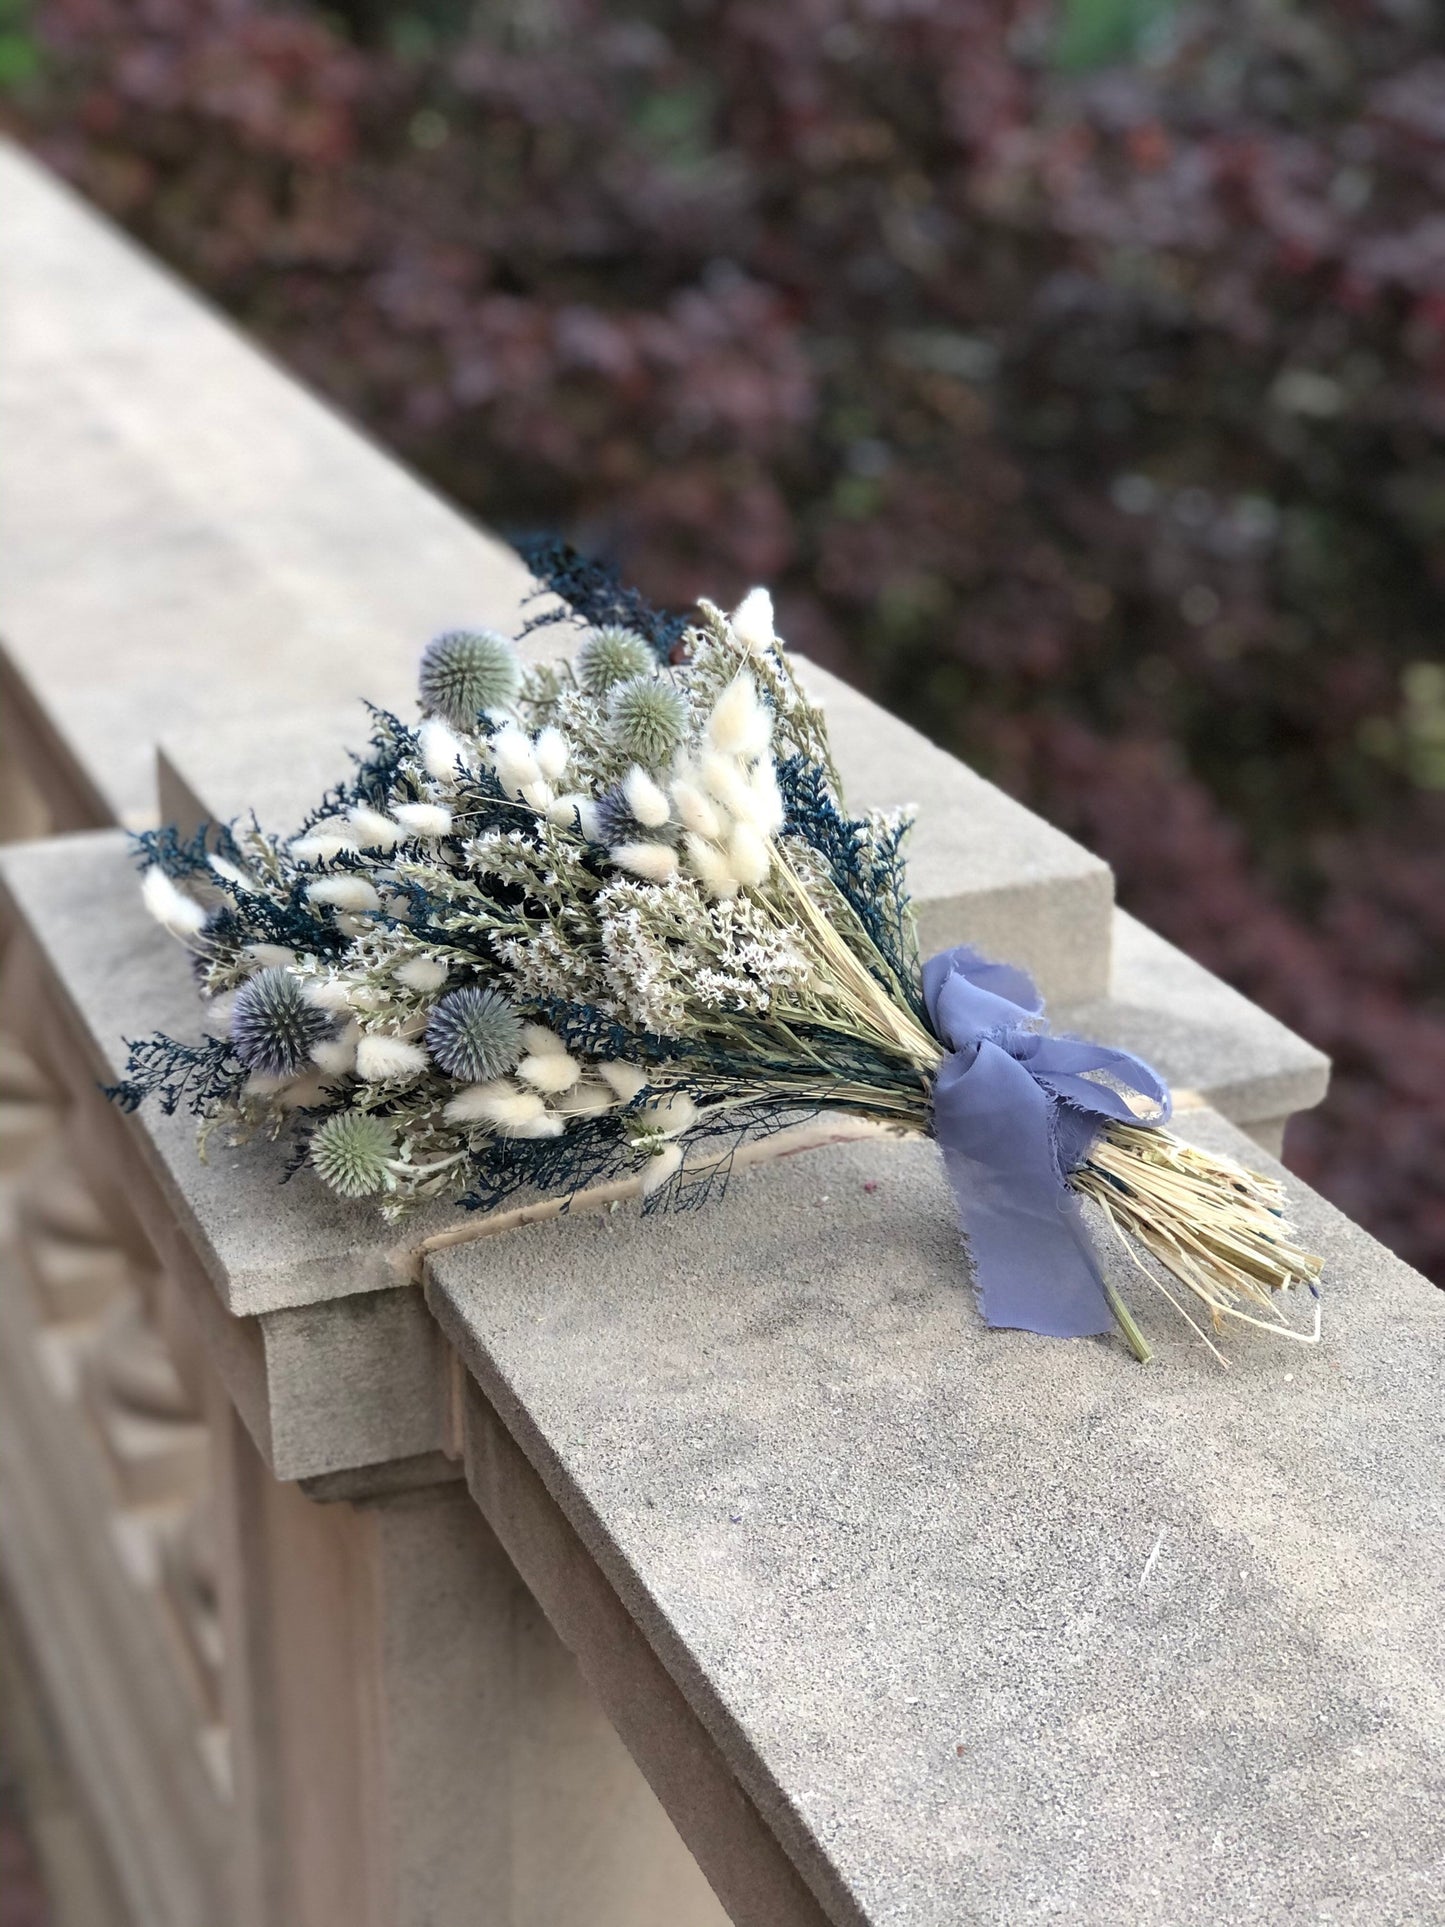 Clear Skies Collection, Wedding Bouquet, Dried Flowers, Winter, Preserved, Bridal, Globe Thistle, Bunny Tails, White, Ribbon, German Statice, Caspia, Blue, Dried